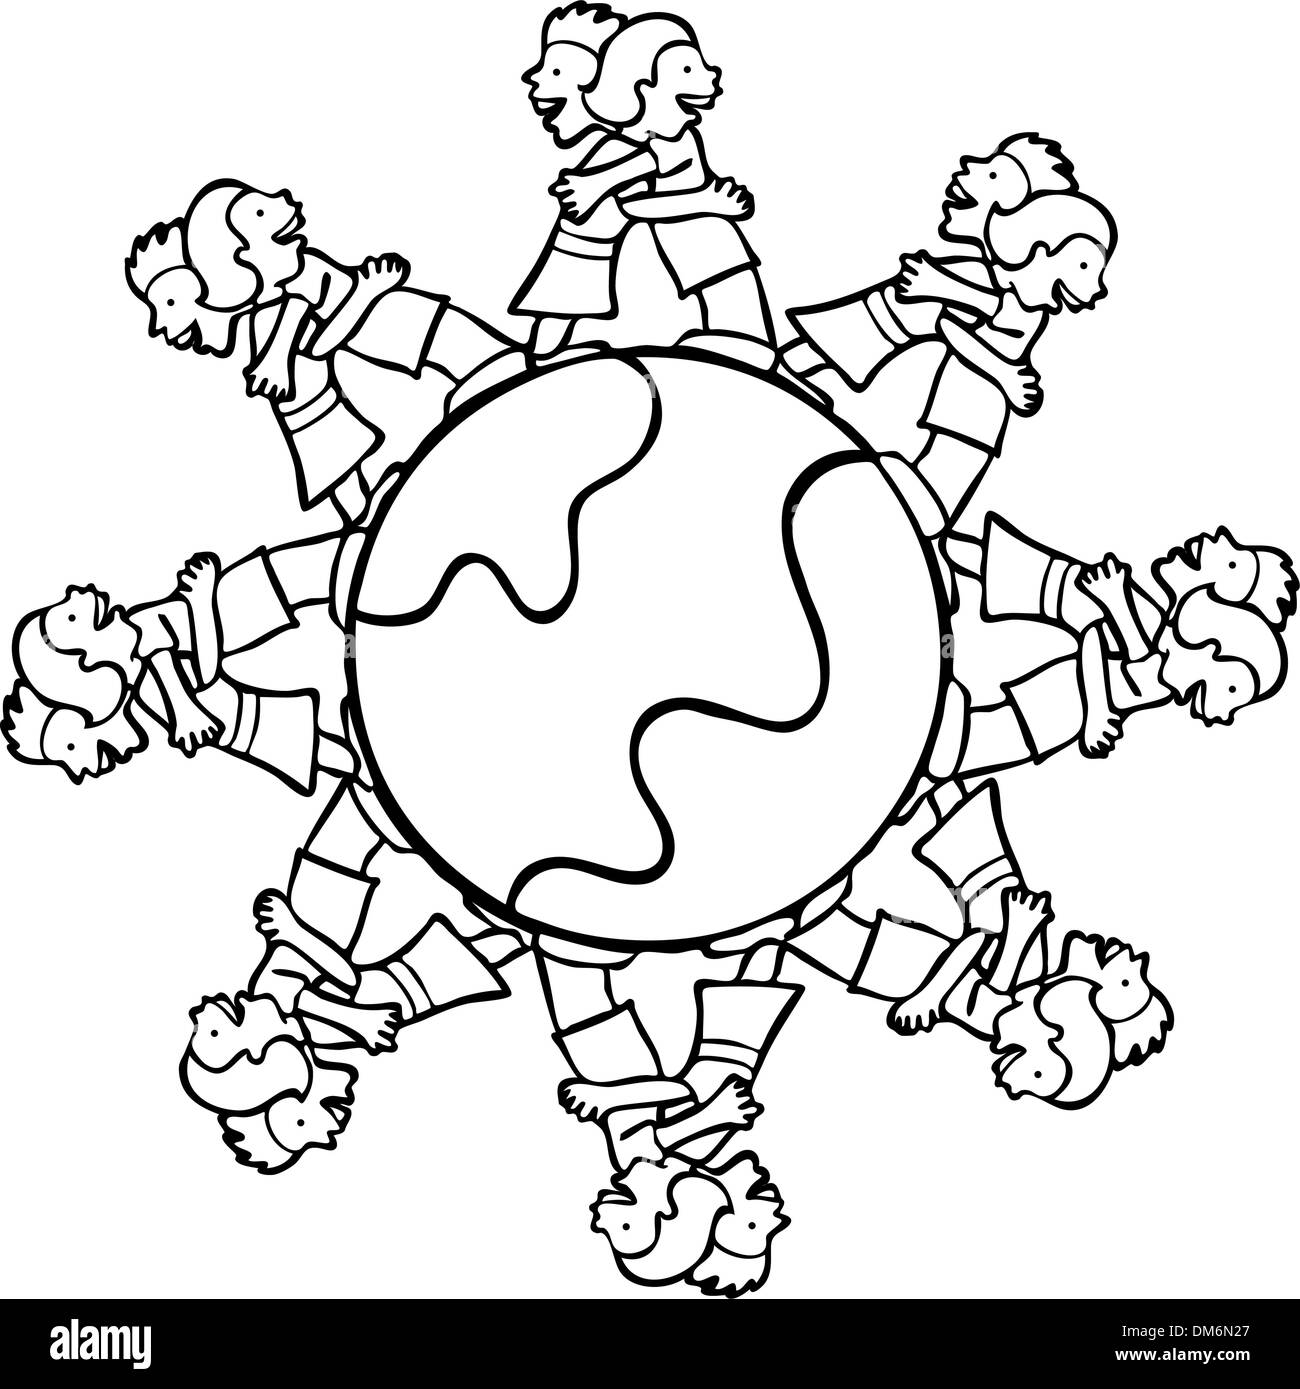 Globe with Surrounding Kids Hugging - B and W Stock Vector